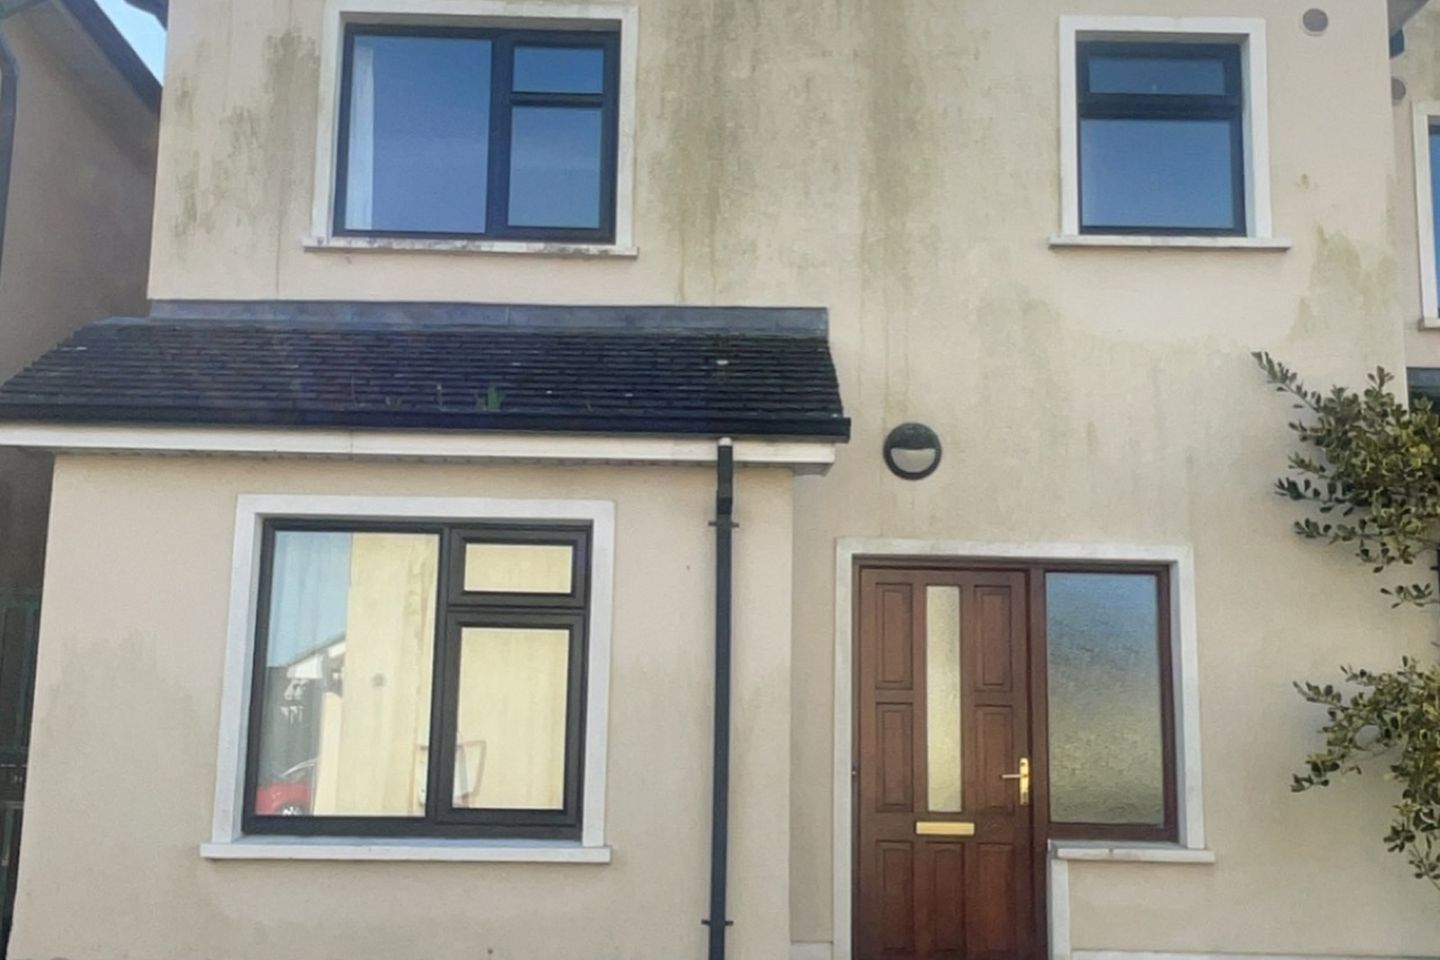 28 Country Meadows, Cloontooa, Tuam, Co. Galway, H54CX98